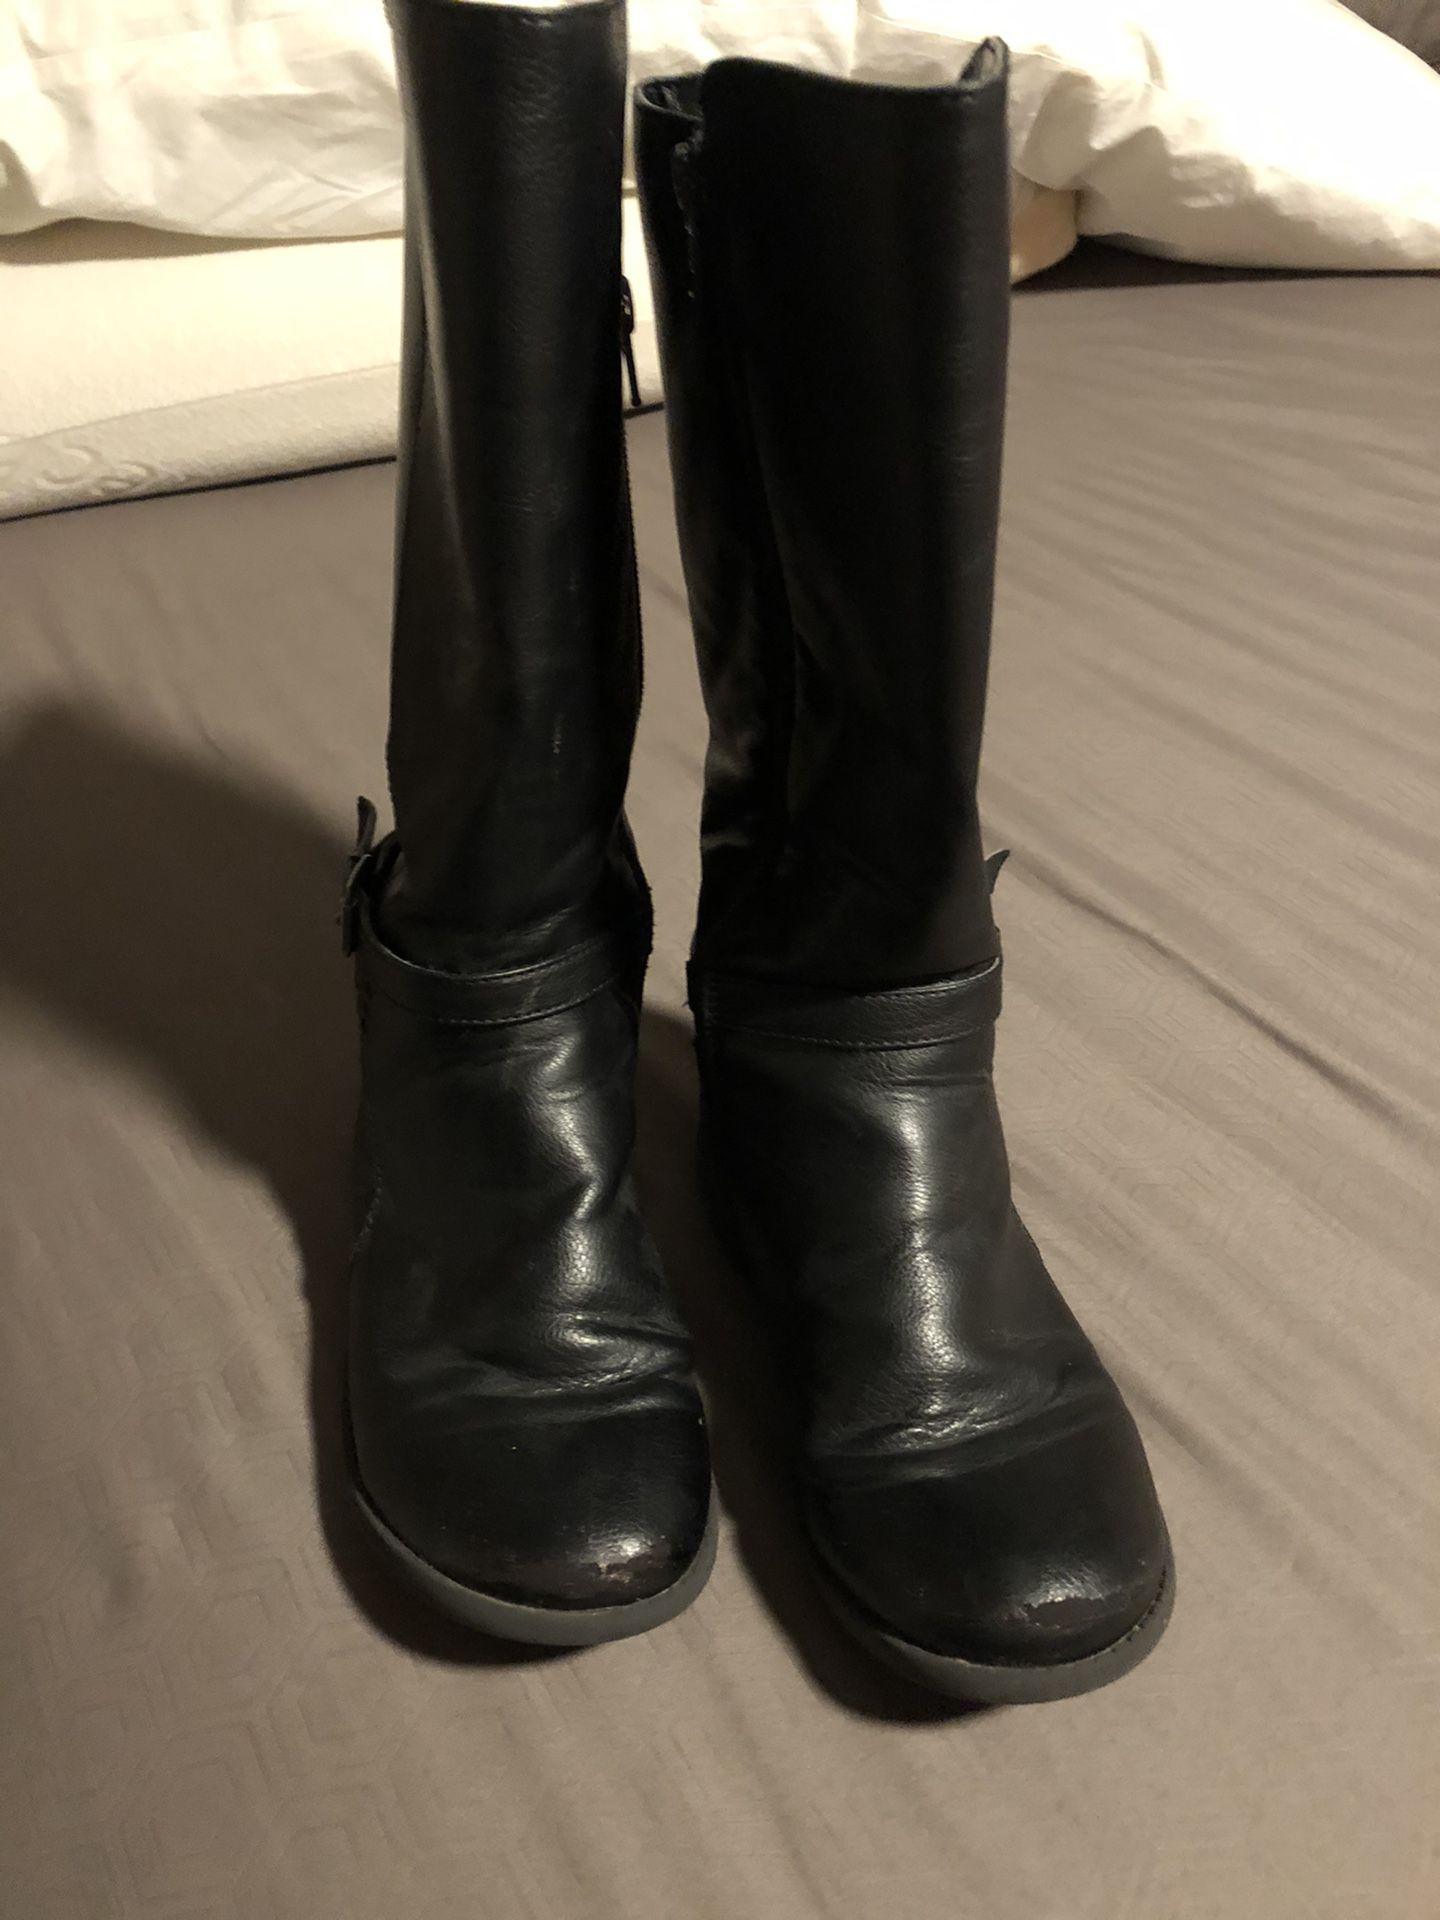 Girls children place boots size 2